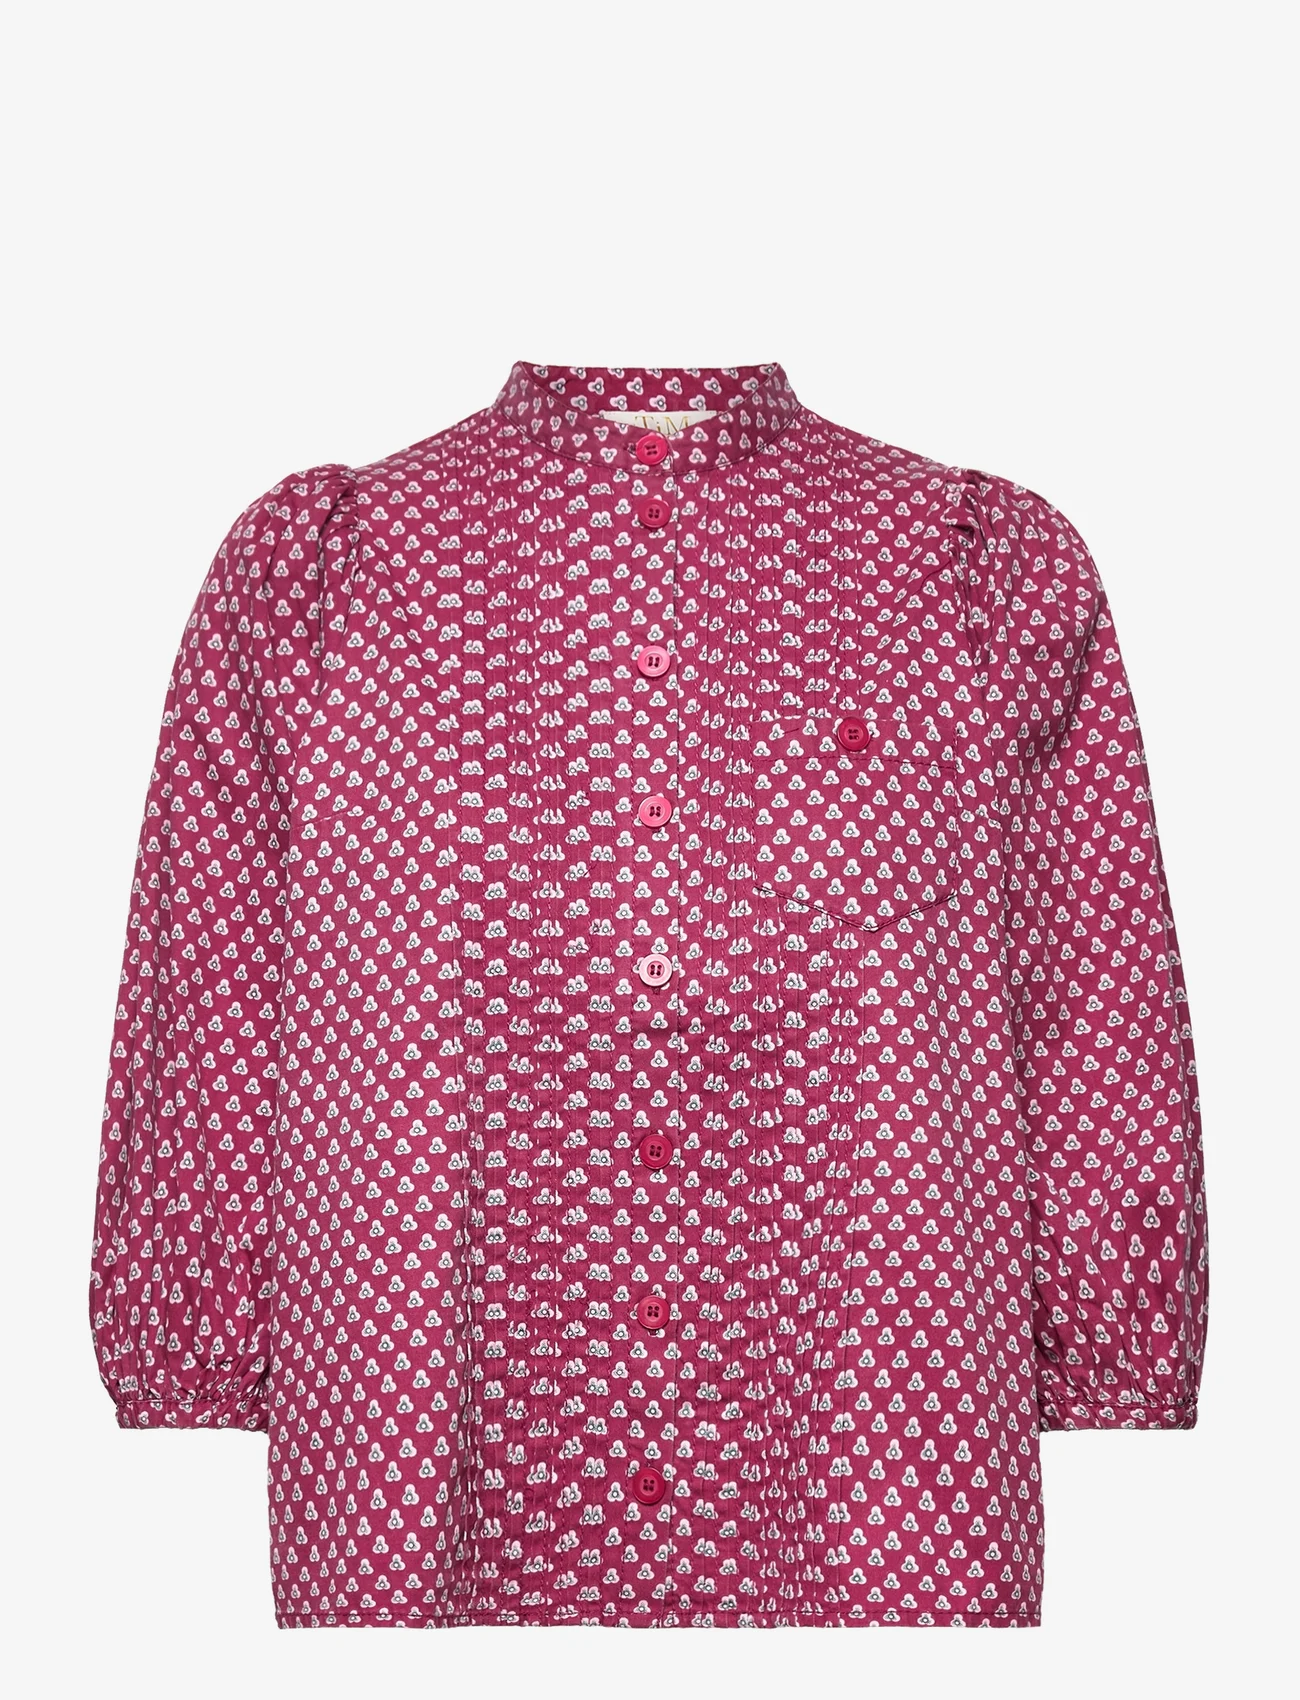 by Ti Mo - Structured Cotton Shirt - short-sleeved blouses - floral dots - 0